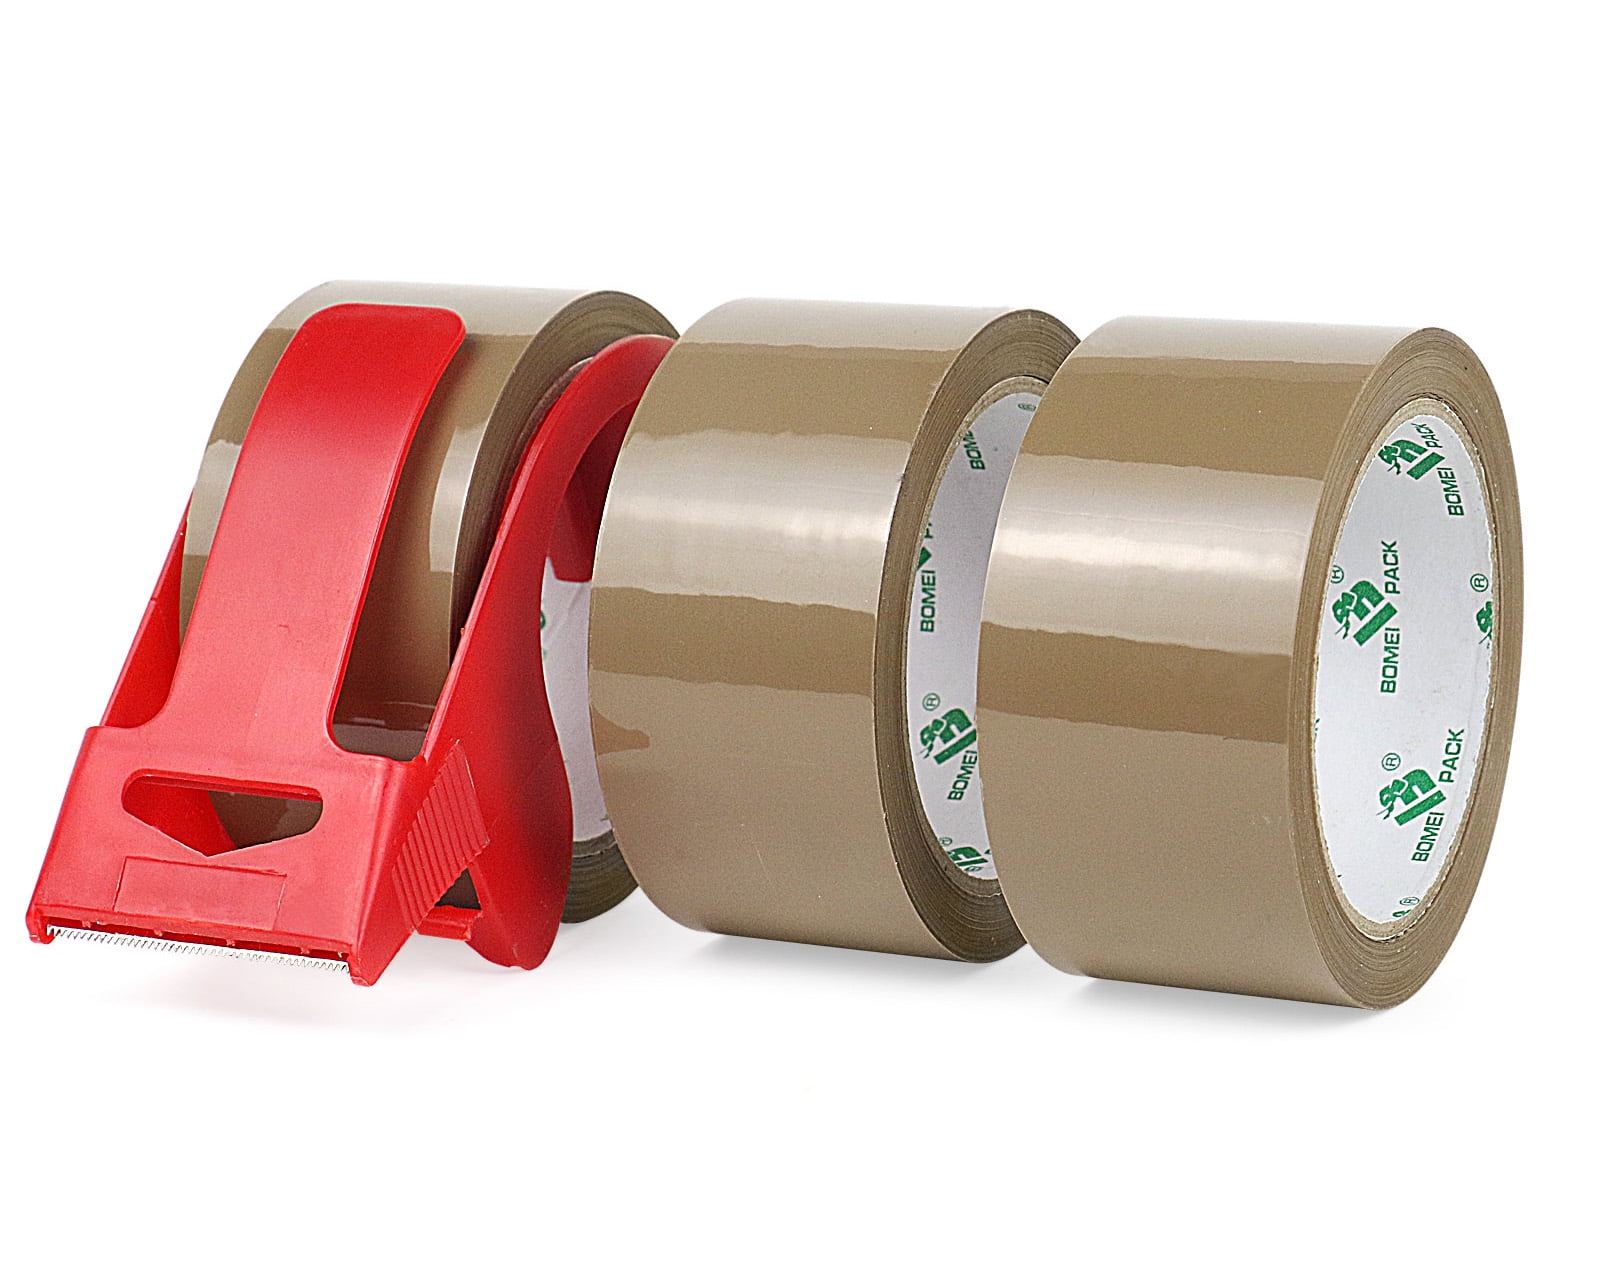 BOMEI PACK Heavy Duty Brown Packing Tape with Dispenser,3 Pack,2.4 Mil,1.88  Inch x 55 Yards,Brown Tape Refills for Industrial Shipping Box Packaging  Tape for Moving, Office  Storage